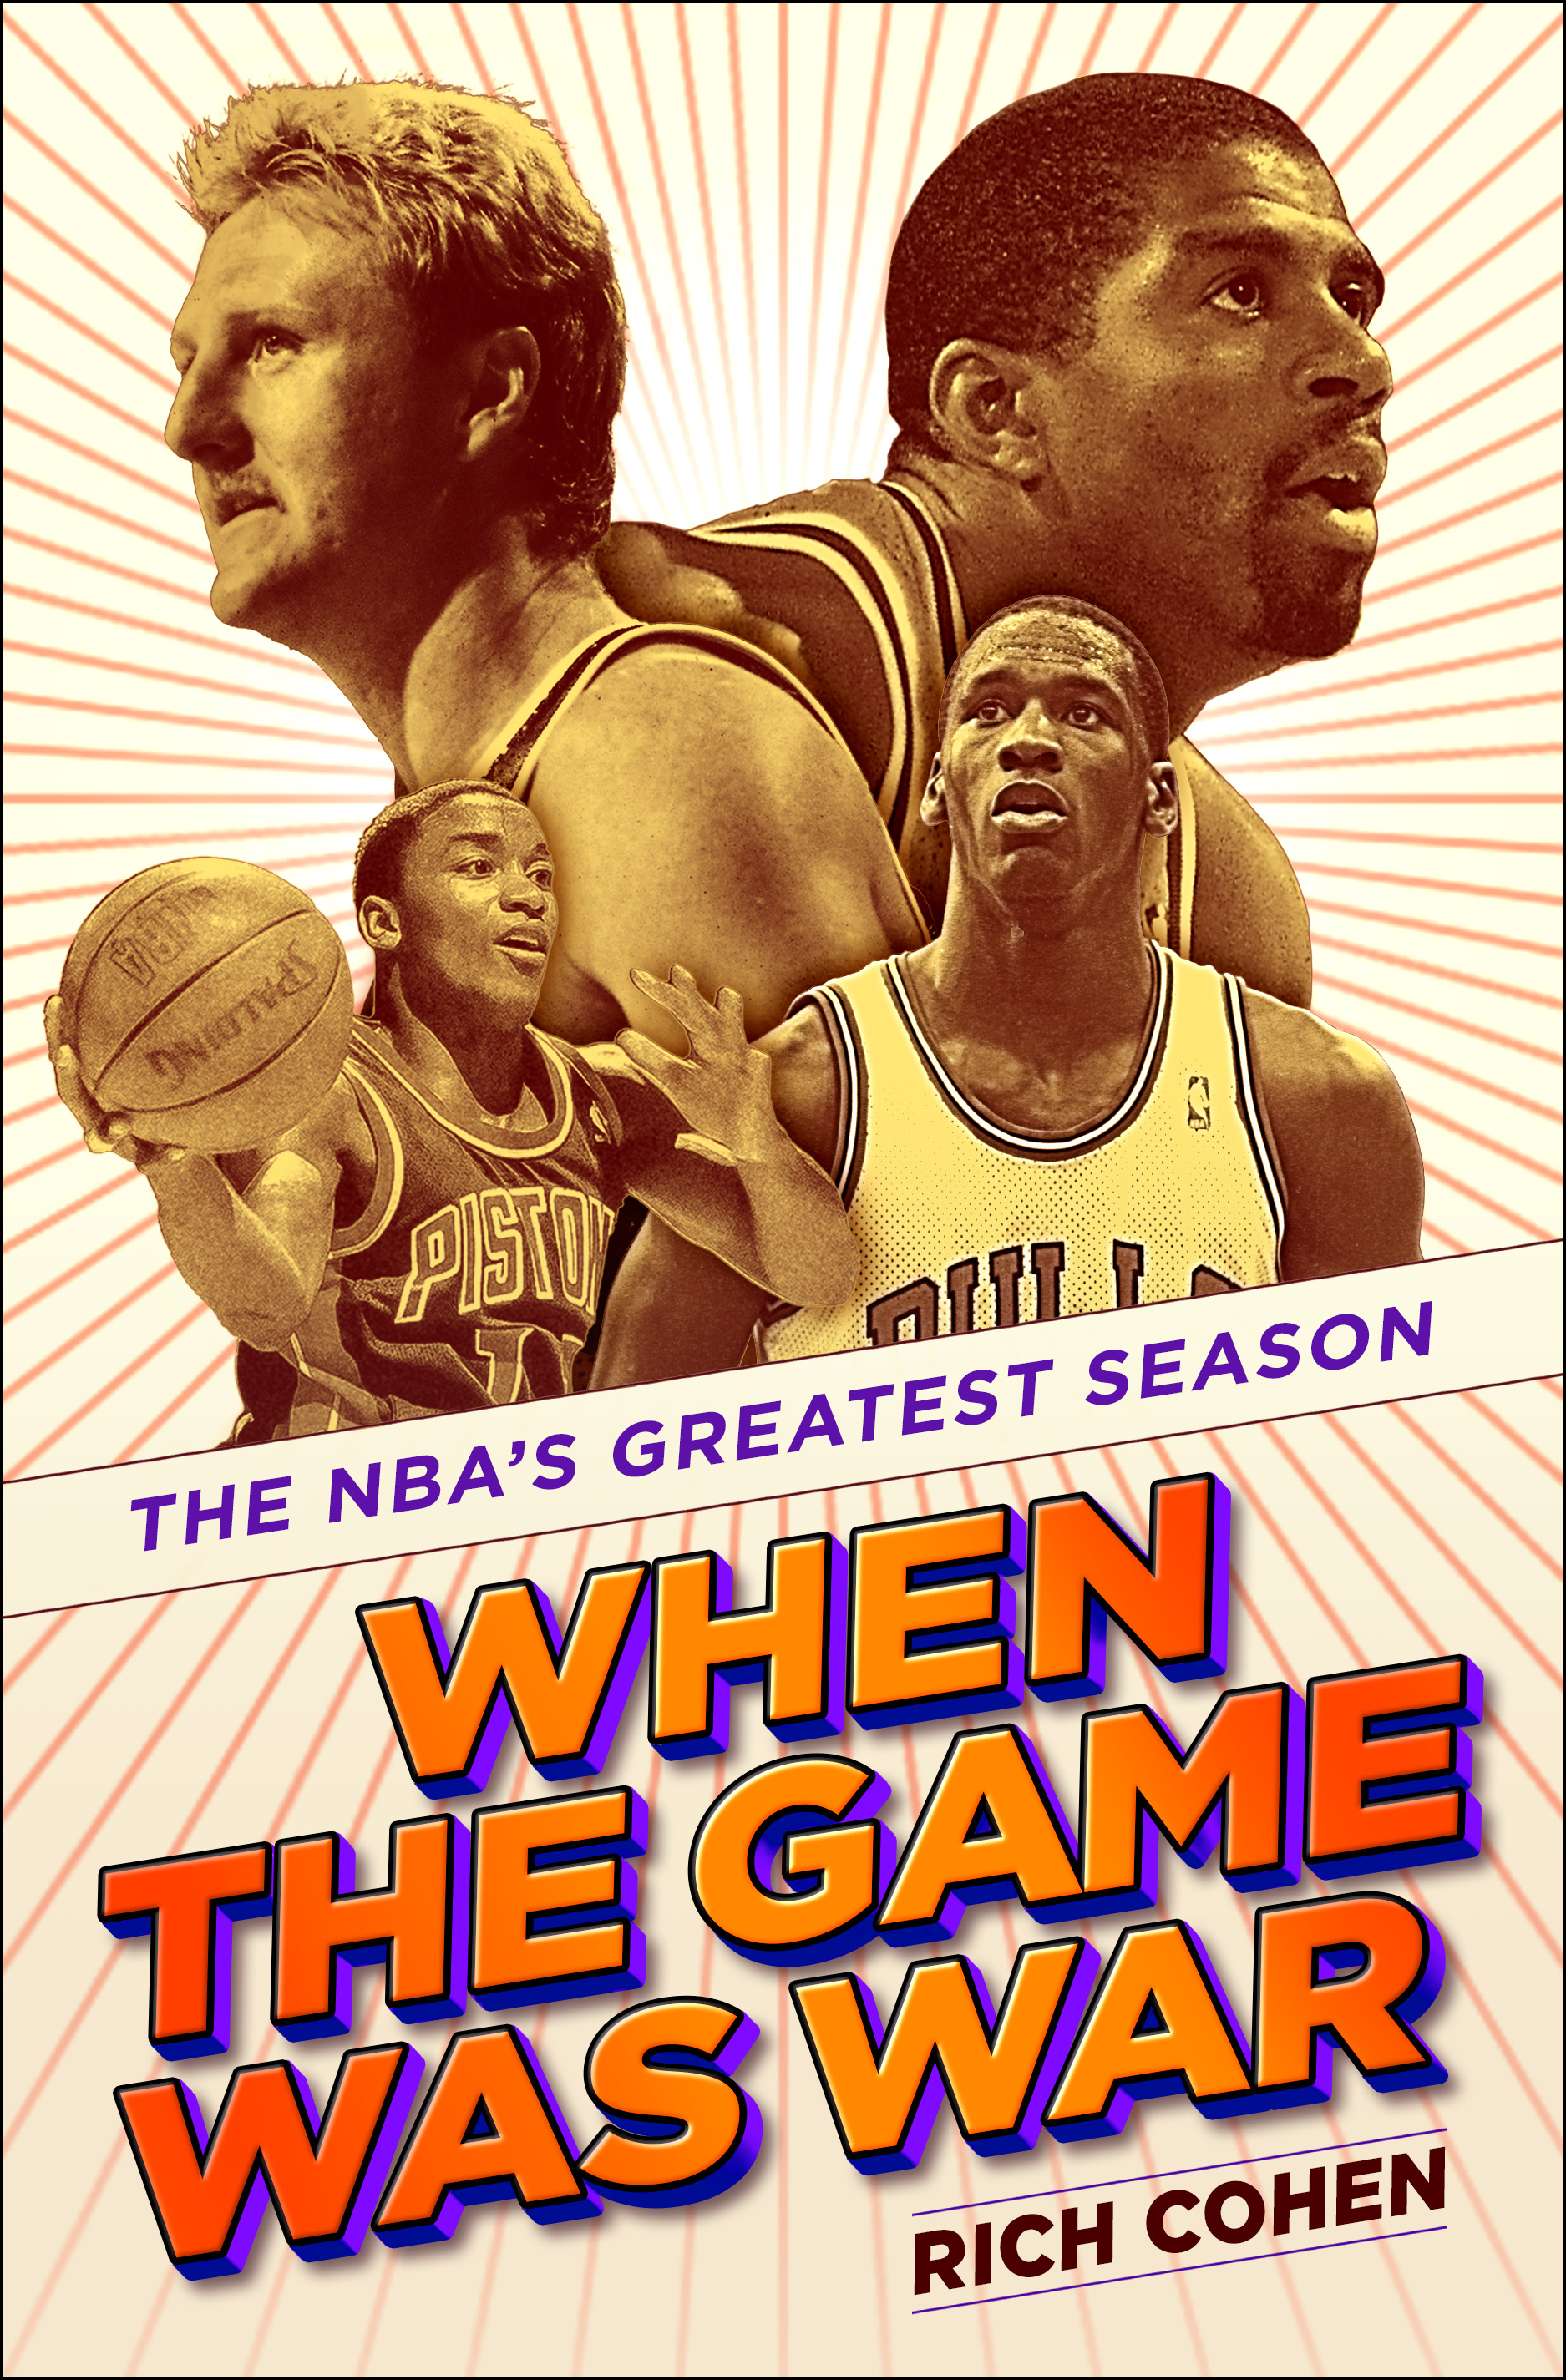 Rich Cohen's New NBA Book Makes the Case for Isiah Thomas - InsideHook